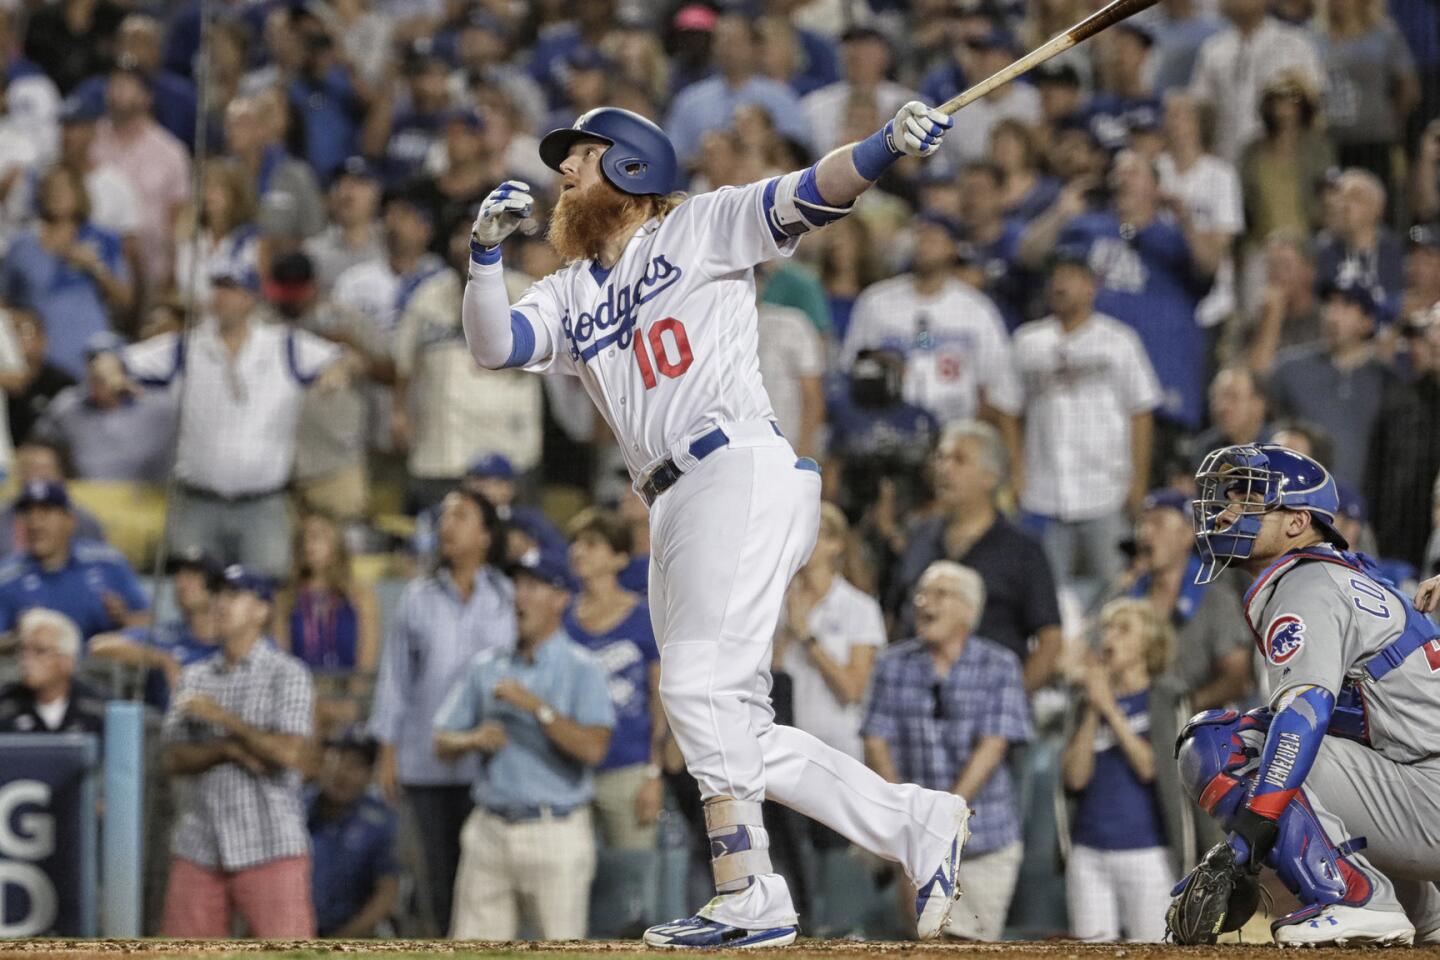 Dodgers' Justin Turner Delivers a Walk-Off Homer to Topple Cubs - The New  York Times